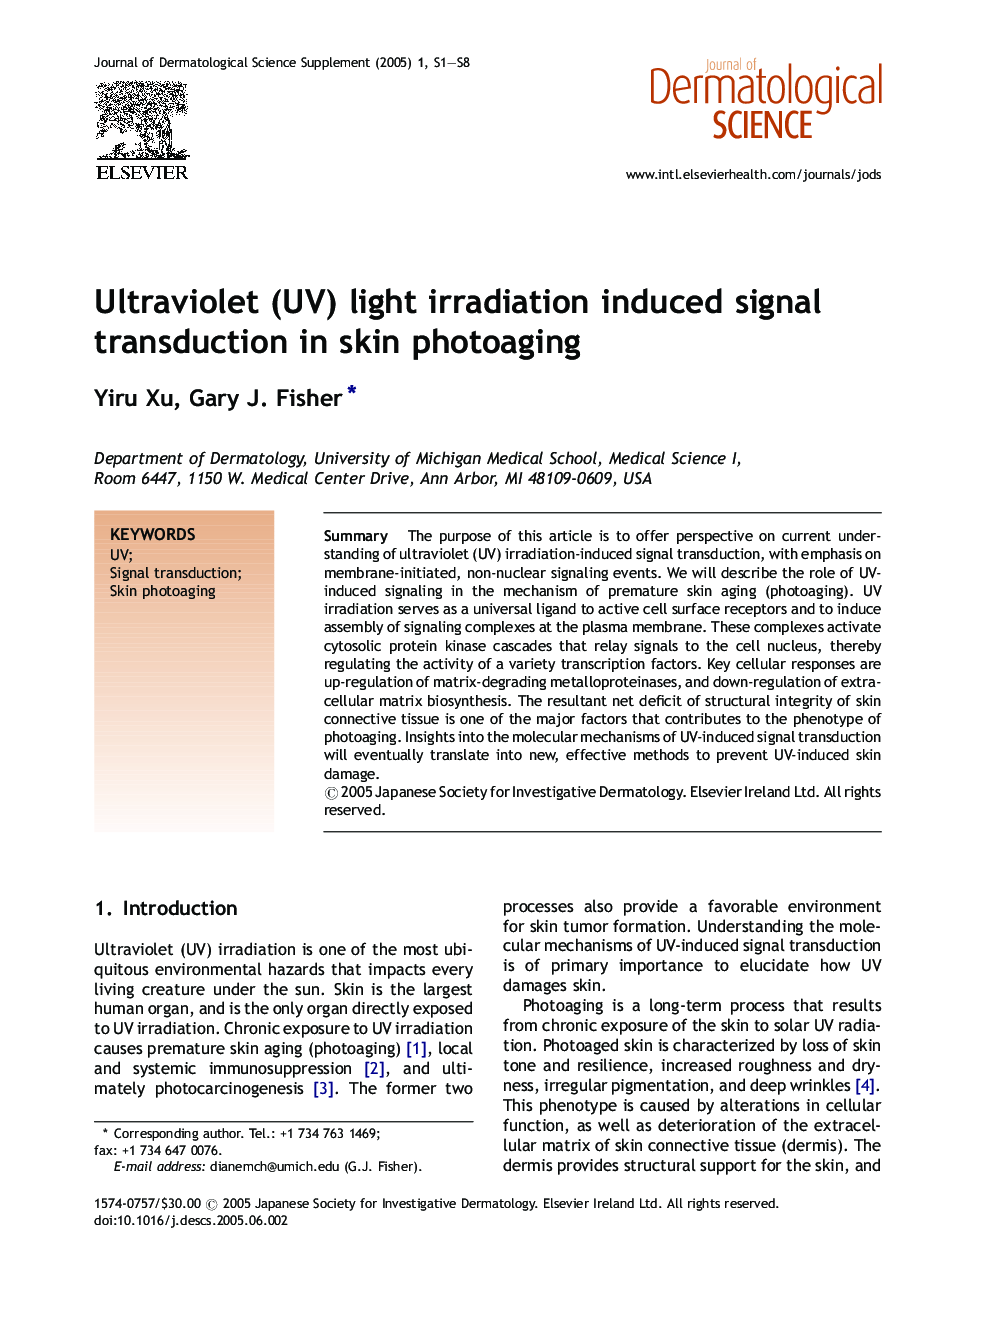 Ultraviolet (UV) light irradiation induced signal transduction in skin photoaging